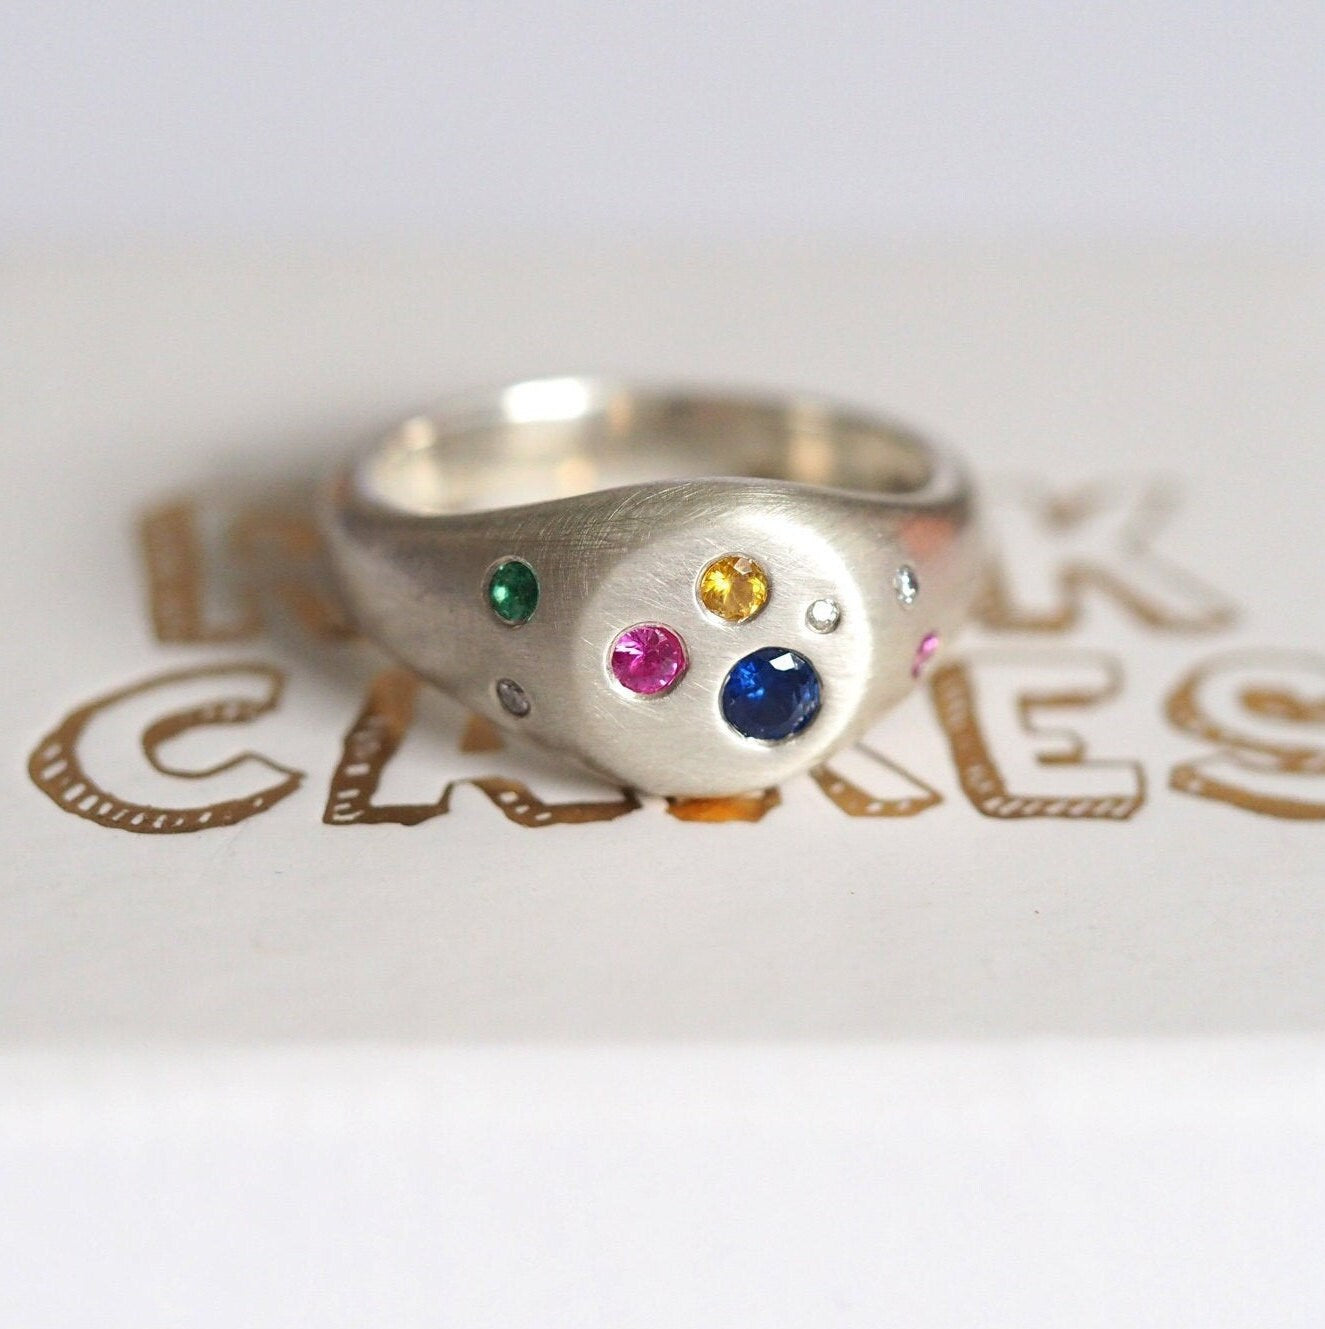 Candy Signet Ring - Recycled Silver and Precious Stones